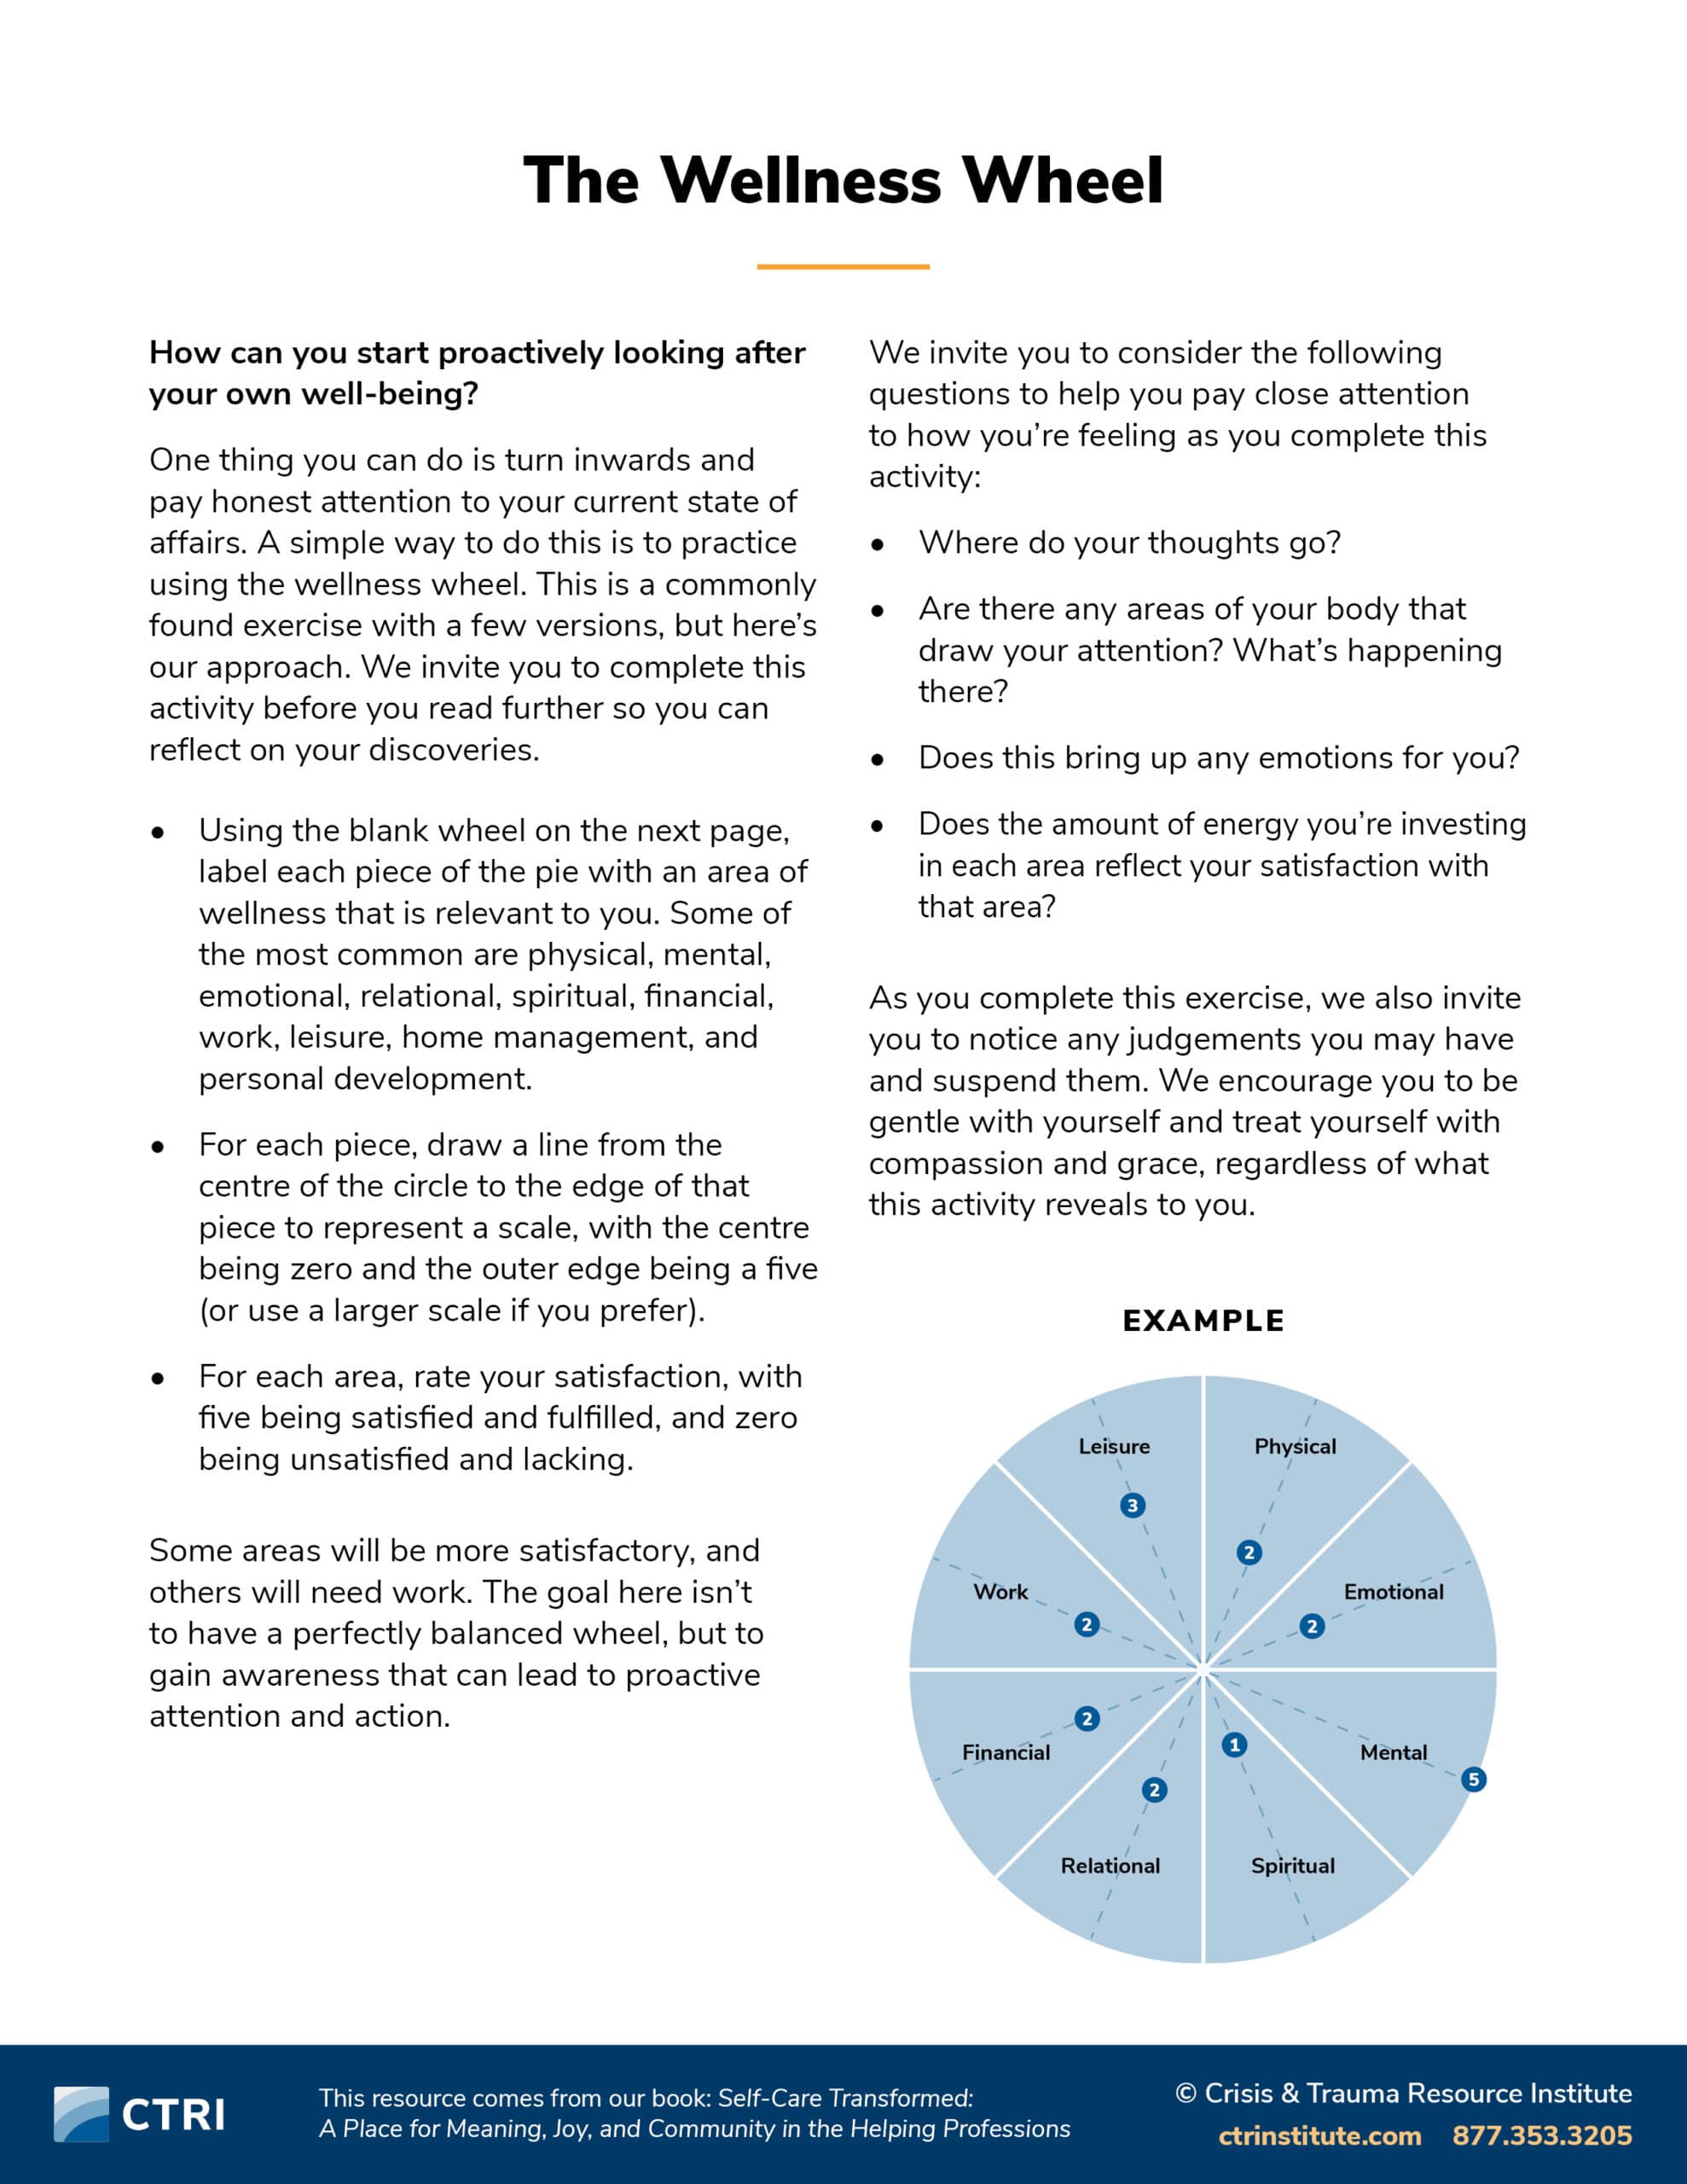 Page 1 The Wellness Wheel Resource from CTRI's Self-Care Transformed Book